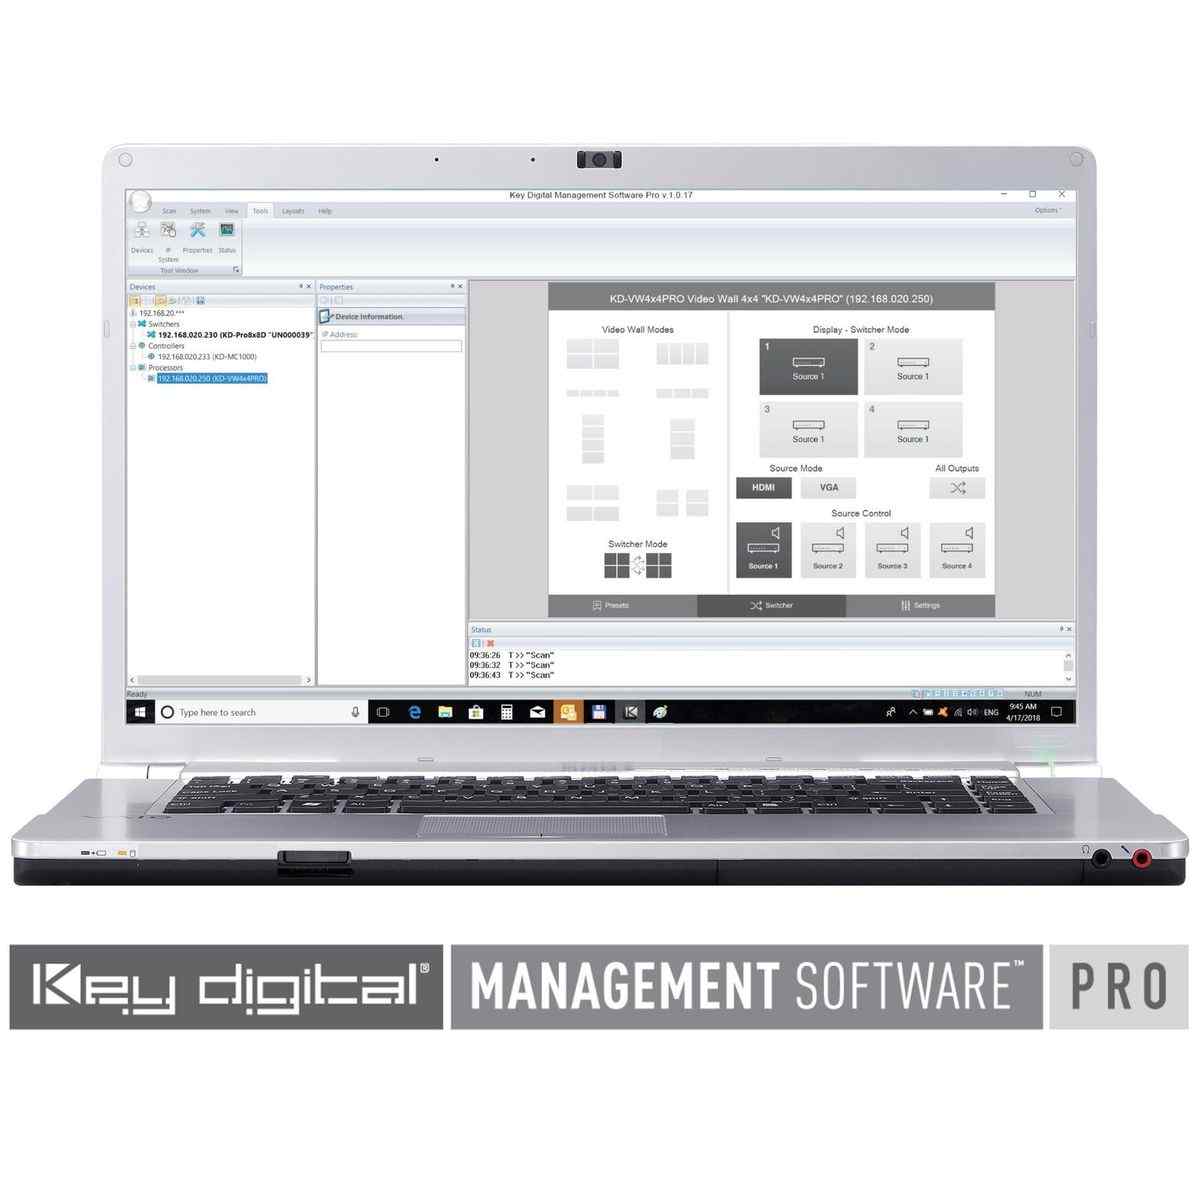 Thumbnail of KD products and systems software user interface